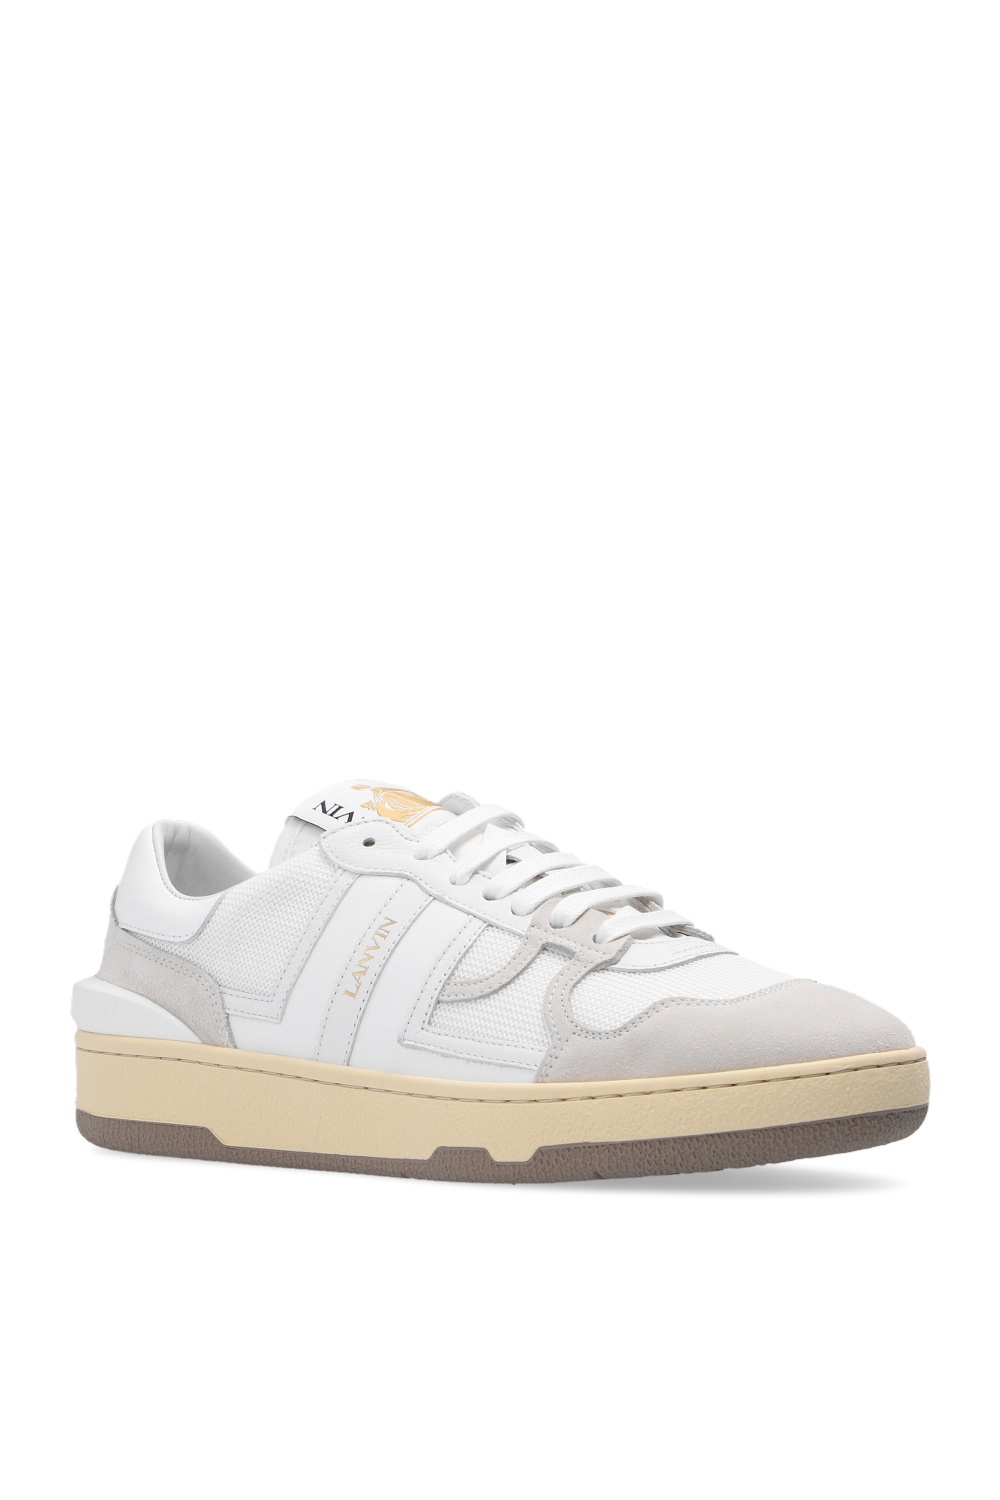 Lanvin ‘Clay Low’ sneakers